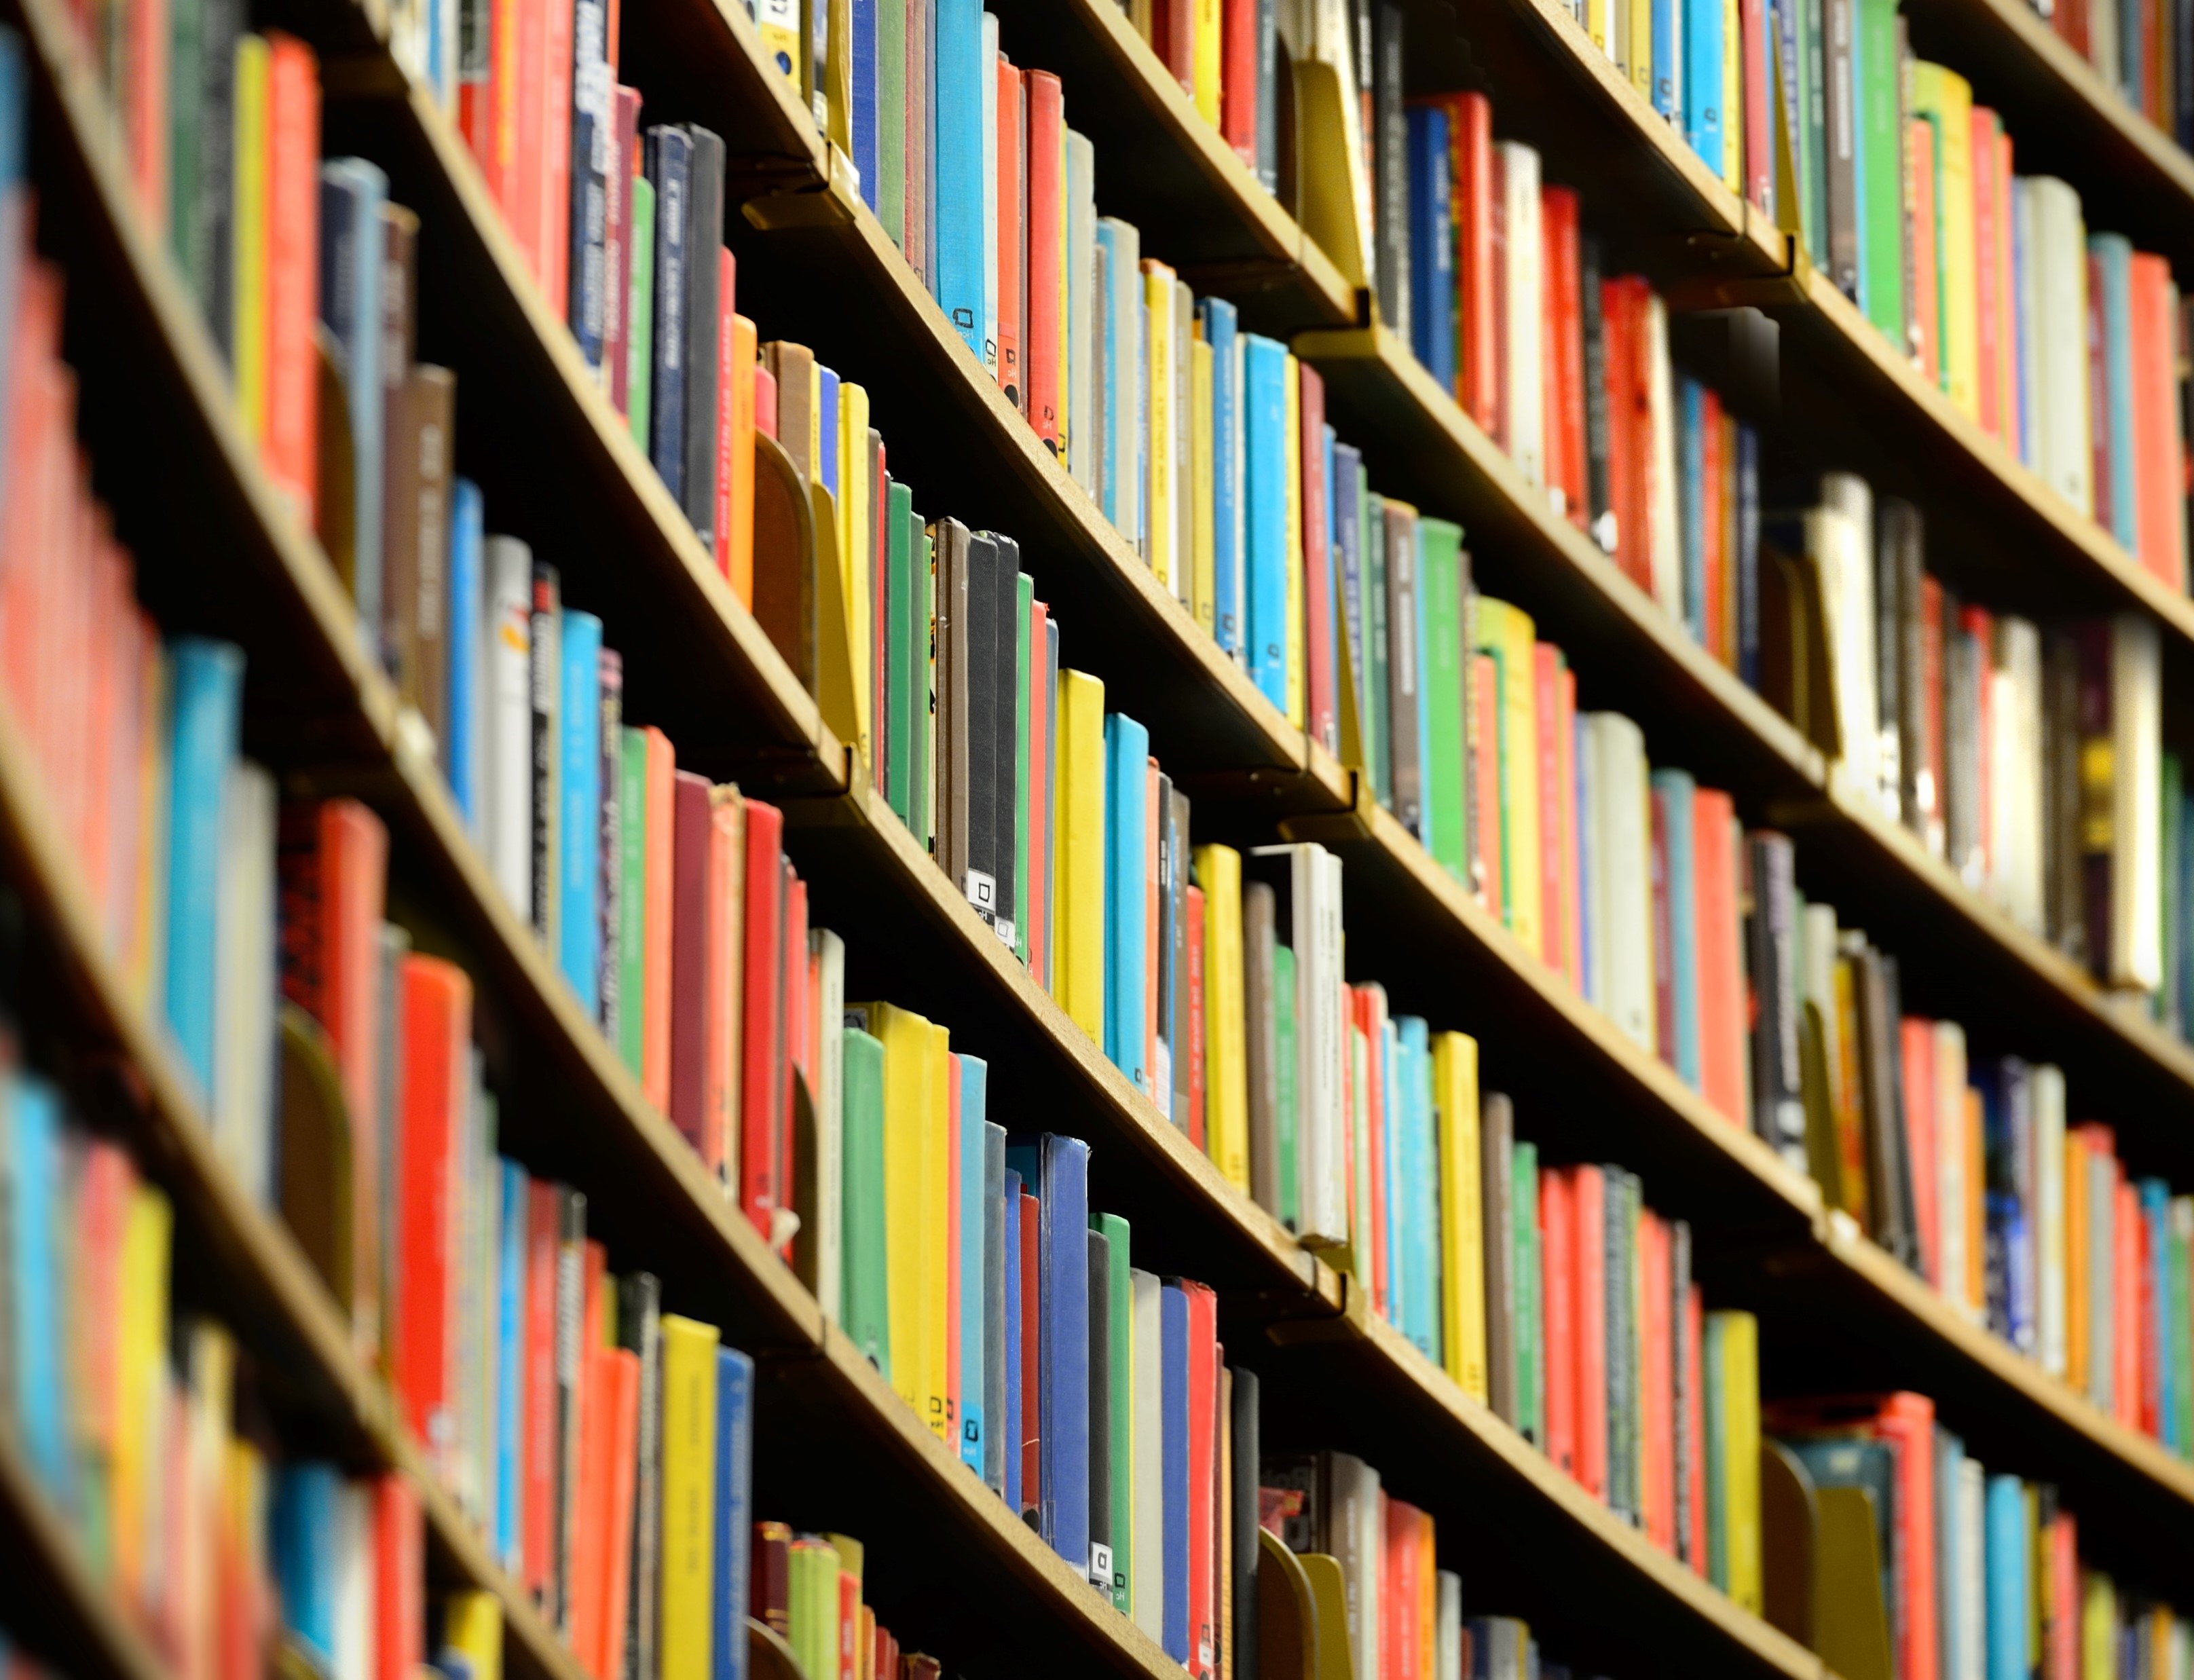 Book shelves with multi-colored books